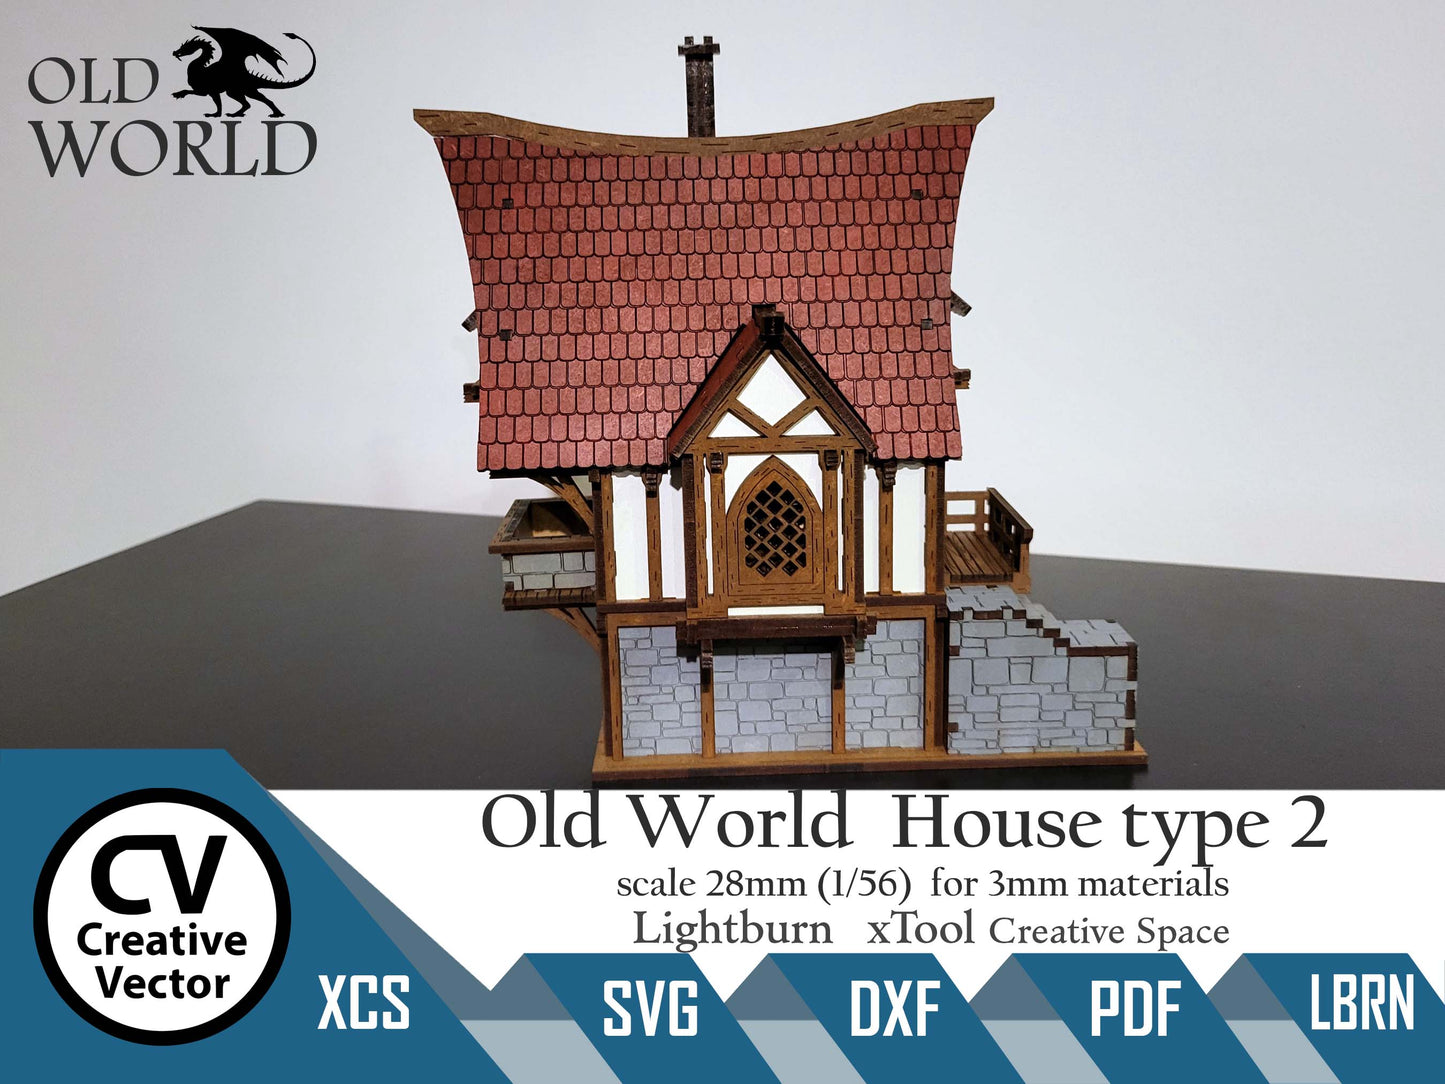 Old World House type 2 in scale 28 mm